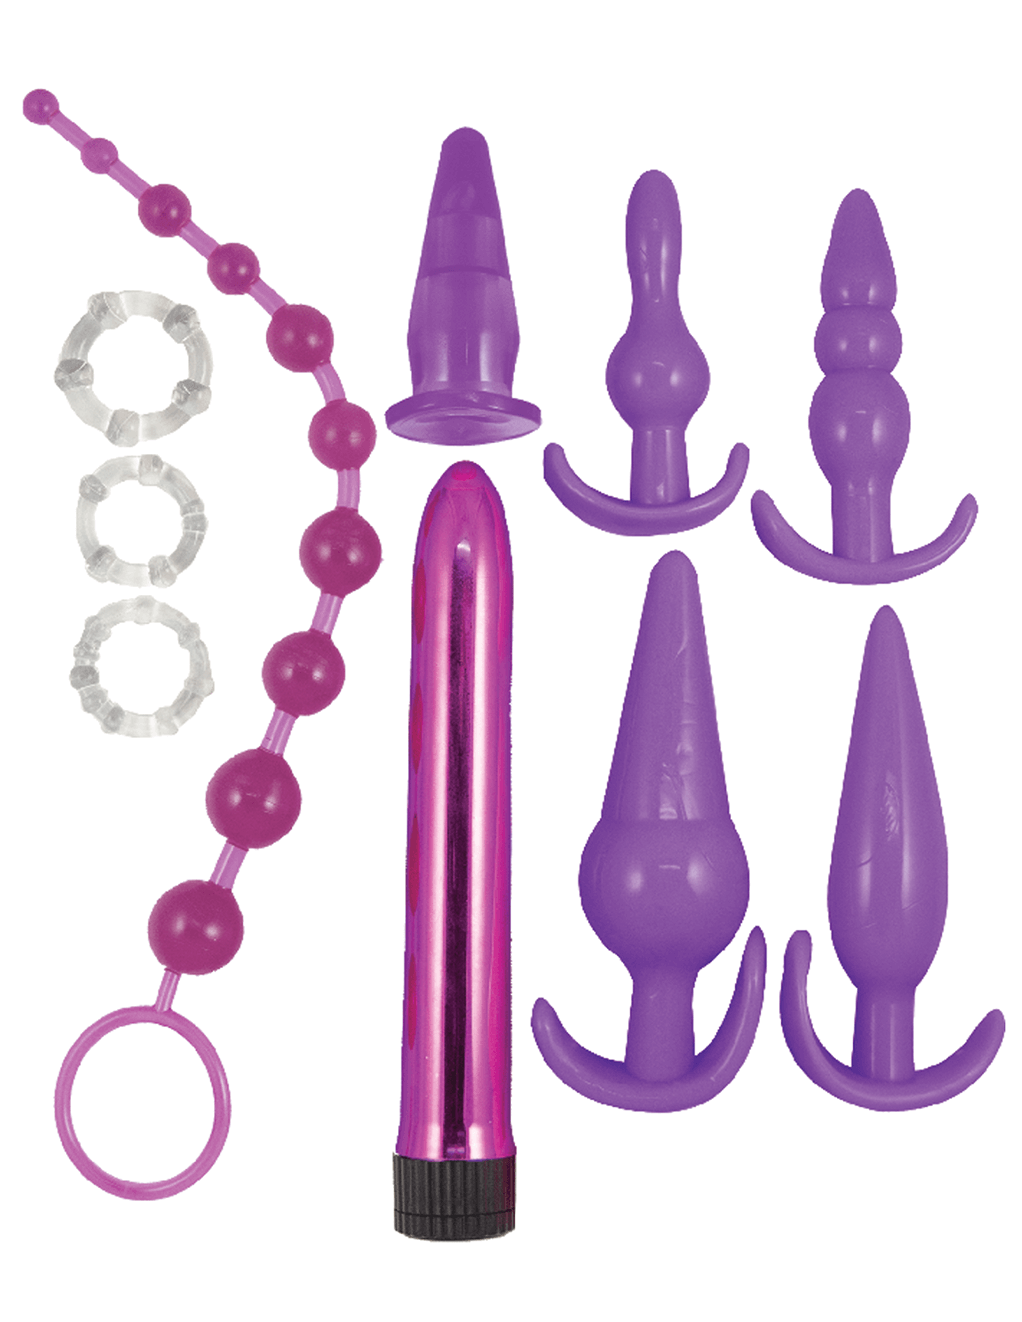 Nasstoys Elite Collection Anal Play Kit - Purple - Box Contents